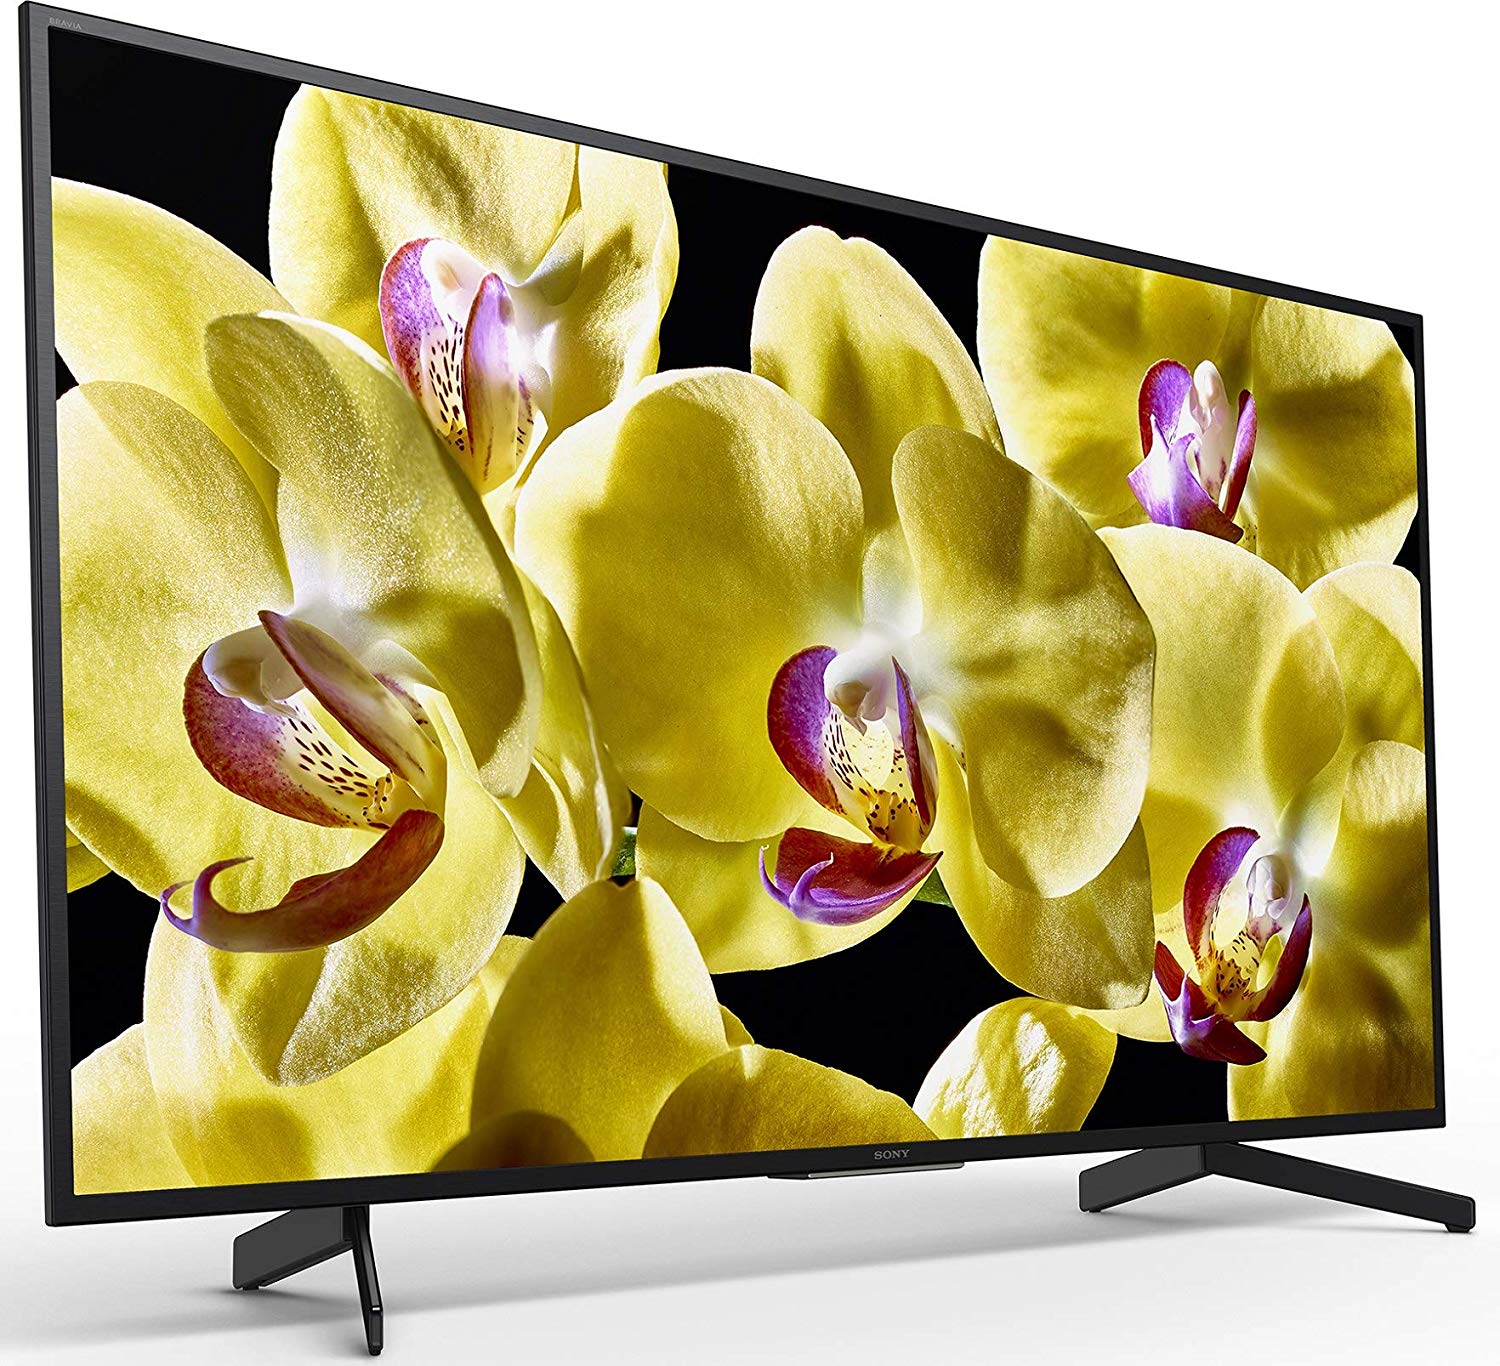 Sony-Bravia-KD-55X8000G-Android-UHD-4K-Smart-LED-TV